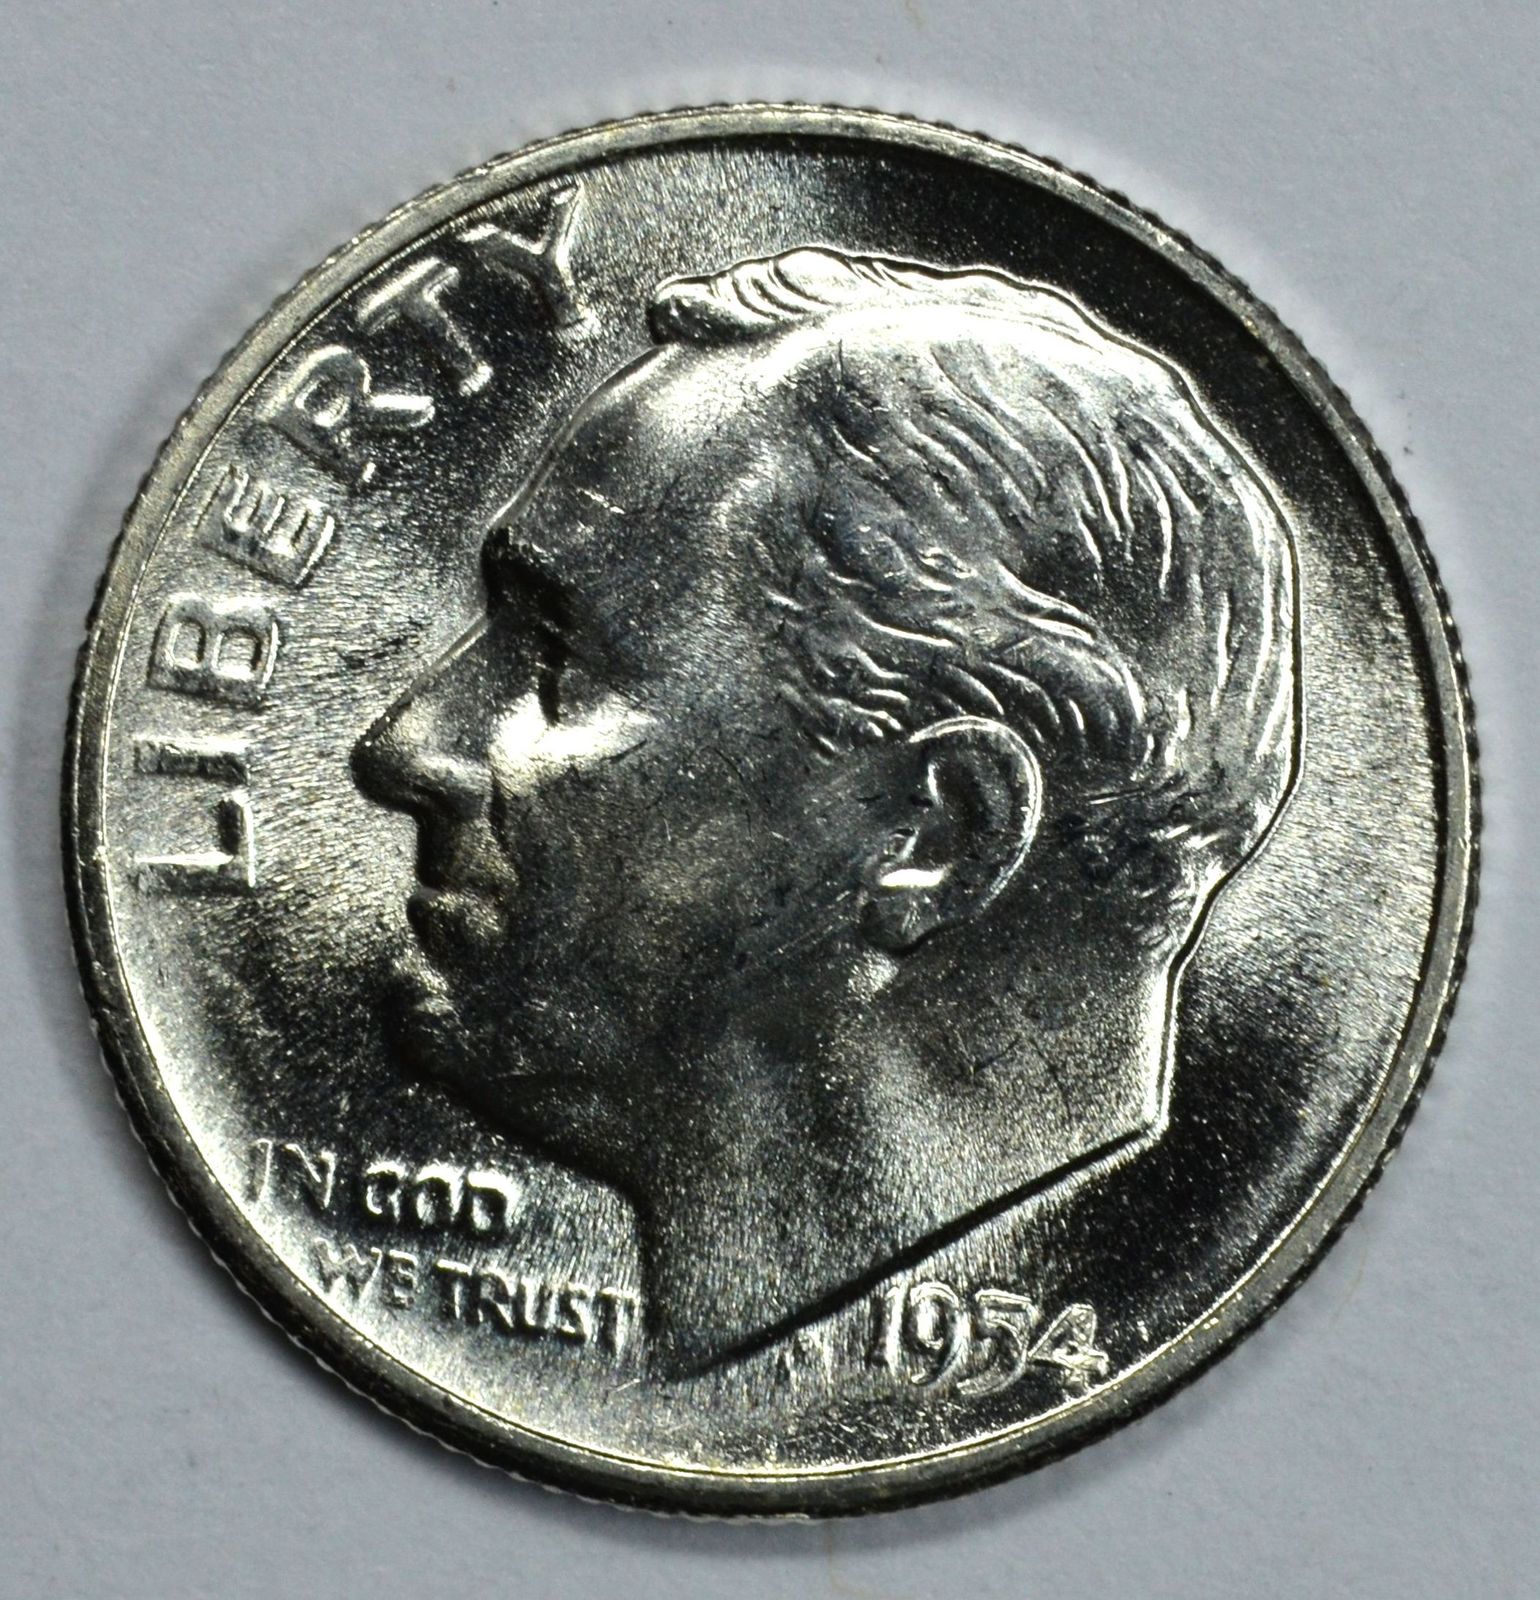 Primary image for 1954 S Roosevelt uncirculated silver dime BU